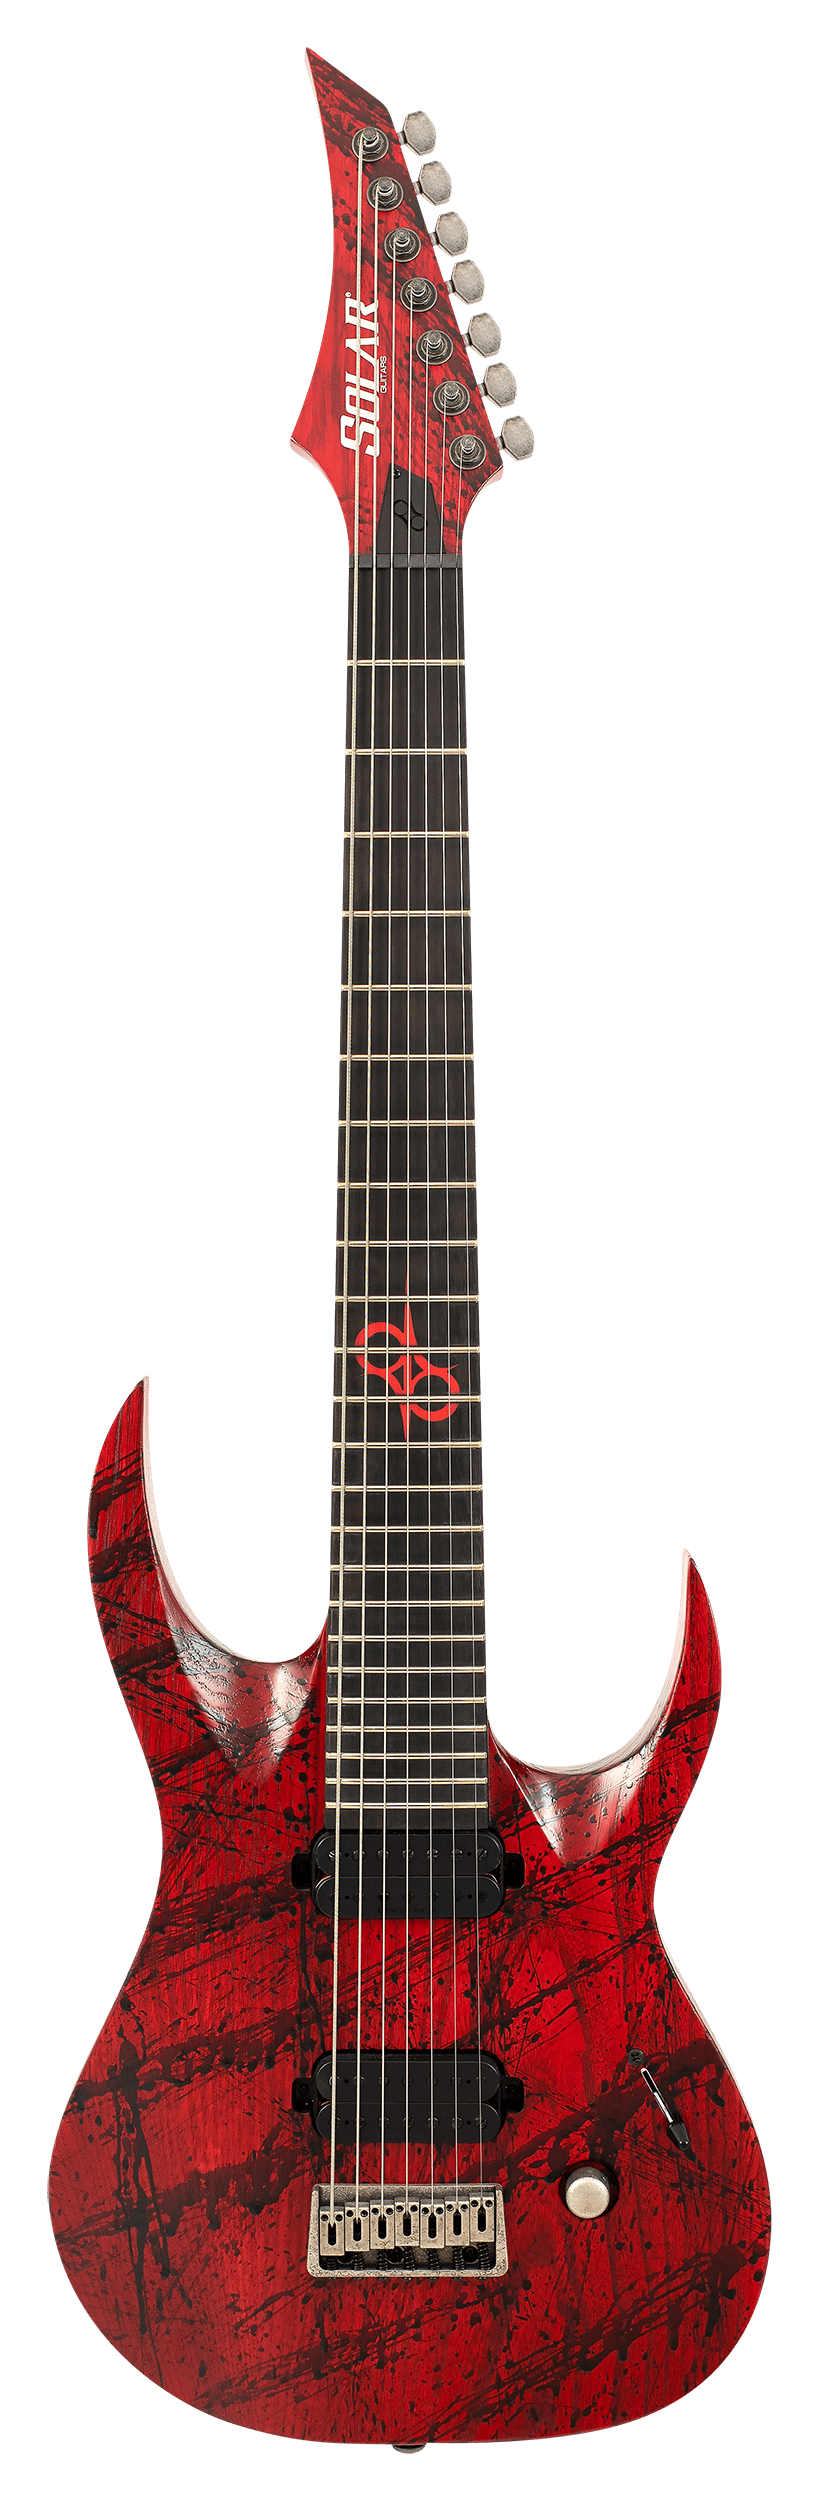  / ó  SOLAR GUITARS A2.7CANIBALISMO+ BLOOD RED OPEN PORE W/BLOOD SPLAT